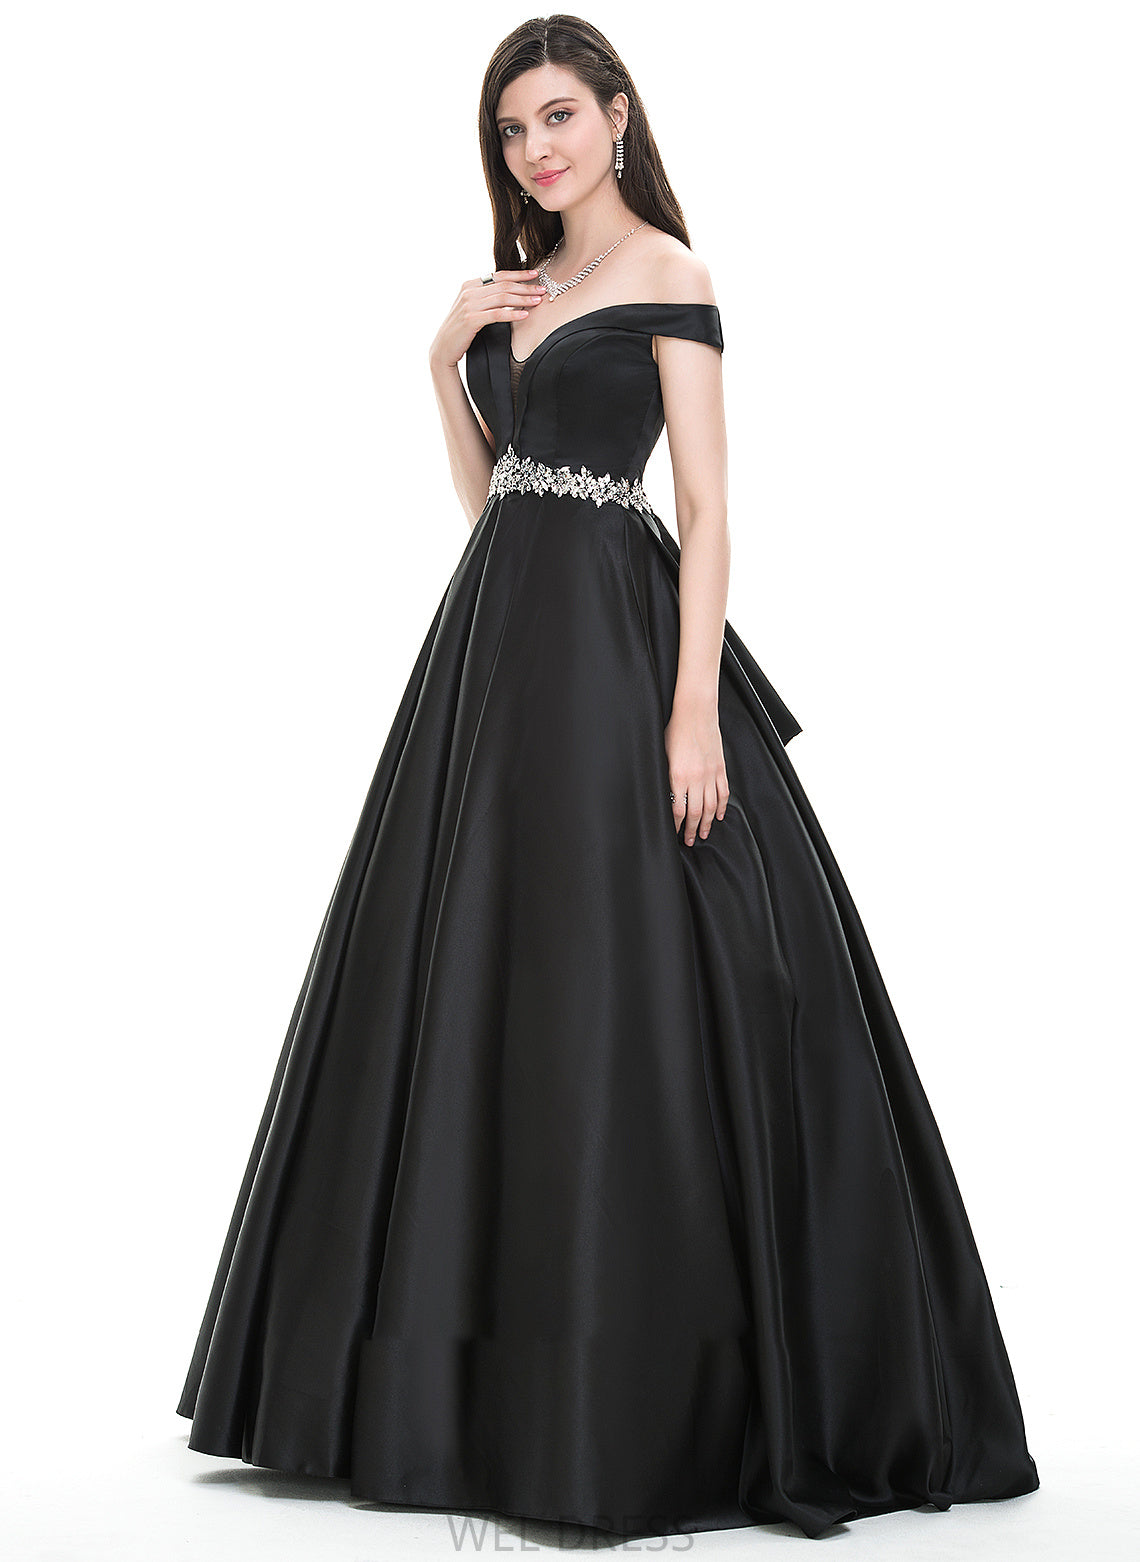 Beading Satin Floor-Length Ball-Gown/Princess With Prom Dresses Noelle Off-the-Shoulder